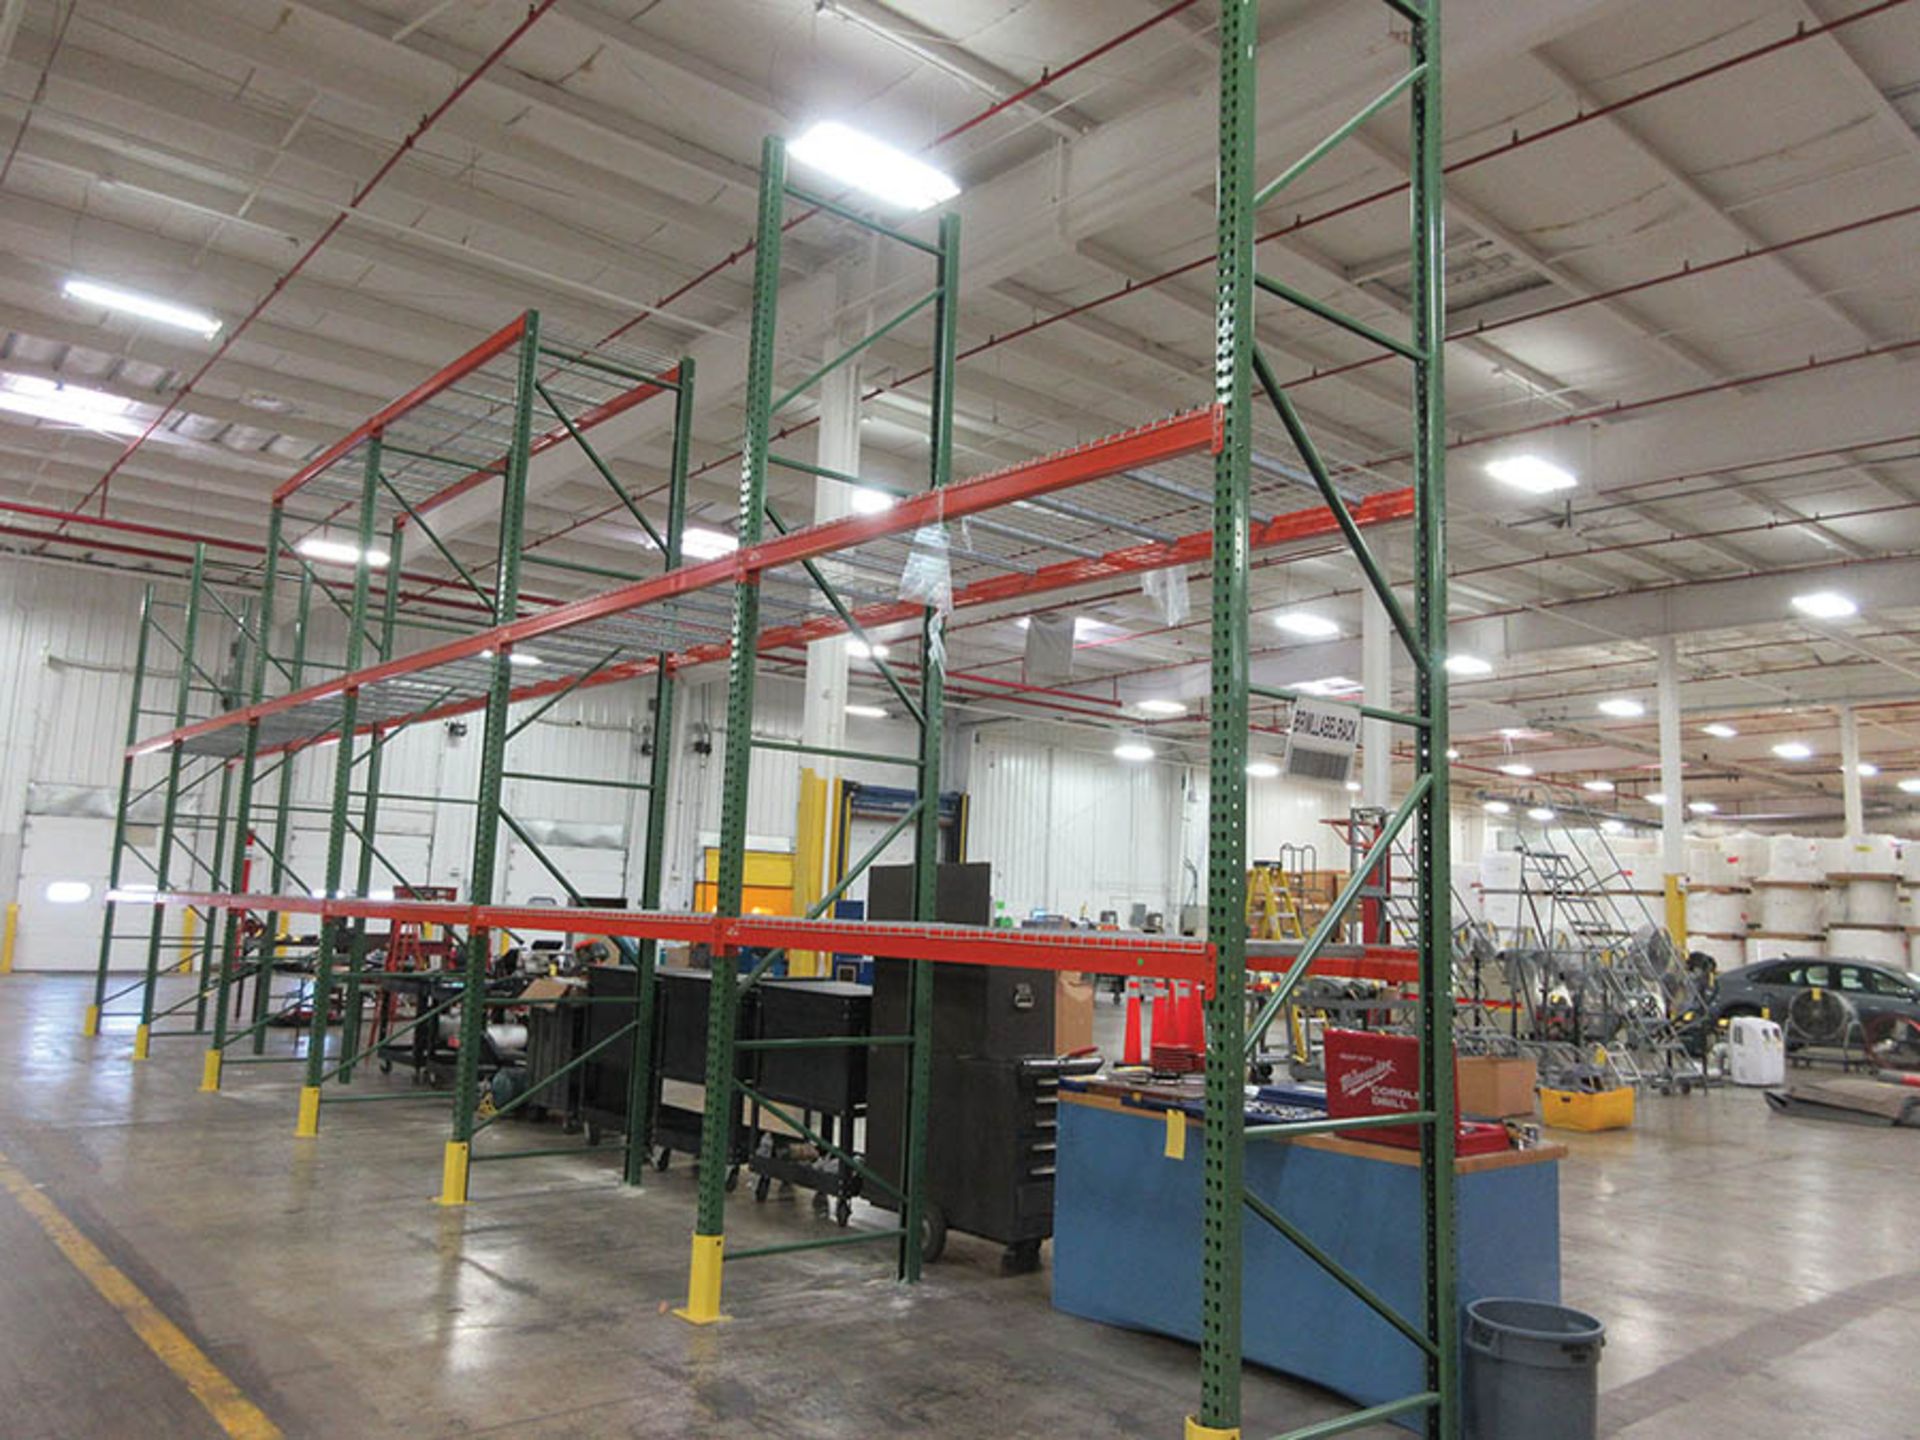 (11) SECTIONS OF HUSKY TEARDROP PALLET RACK: (13) 16' X 42'' UPRIGHTS, (44) 8' X 4'' CROSSBEAMS, AND - Image 3 of 4